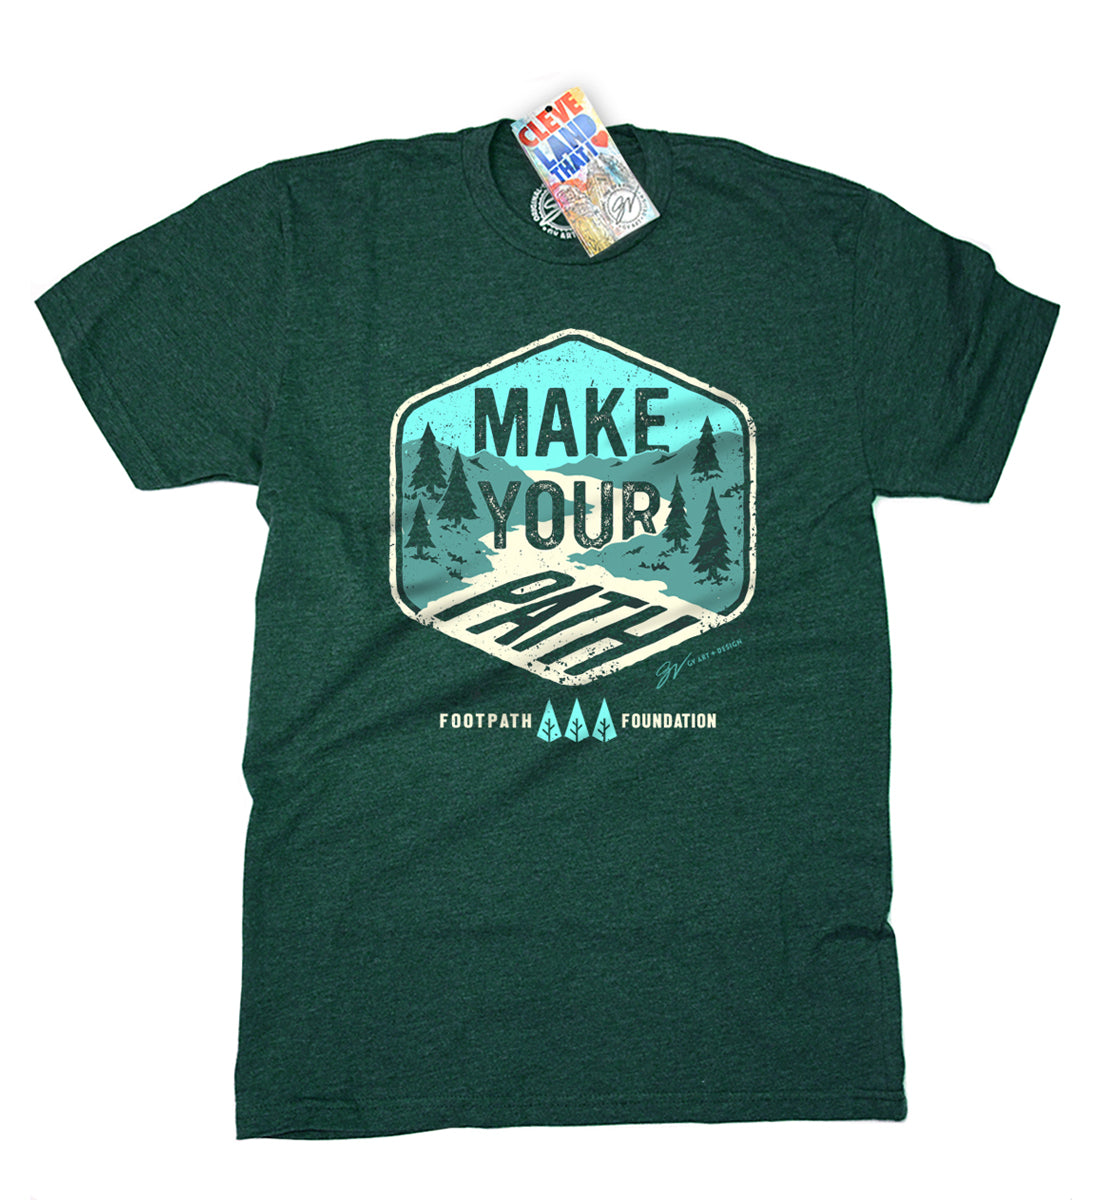 Footpath Foundation "Make Your Own Path" T Shirt